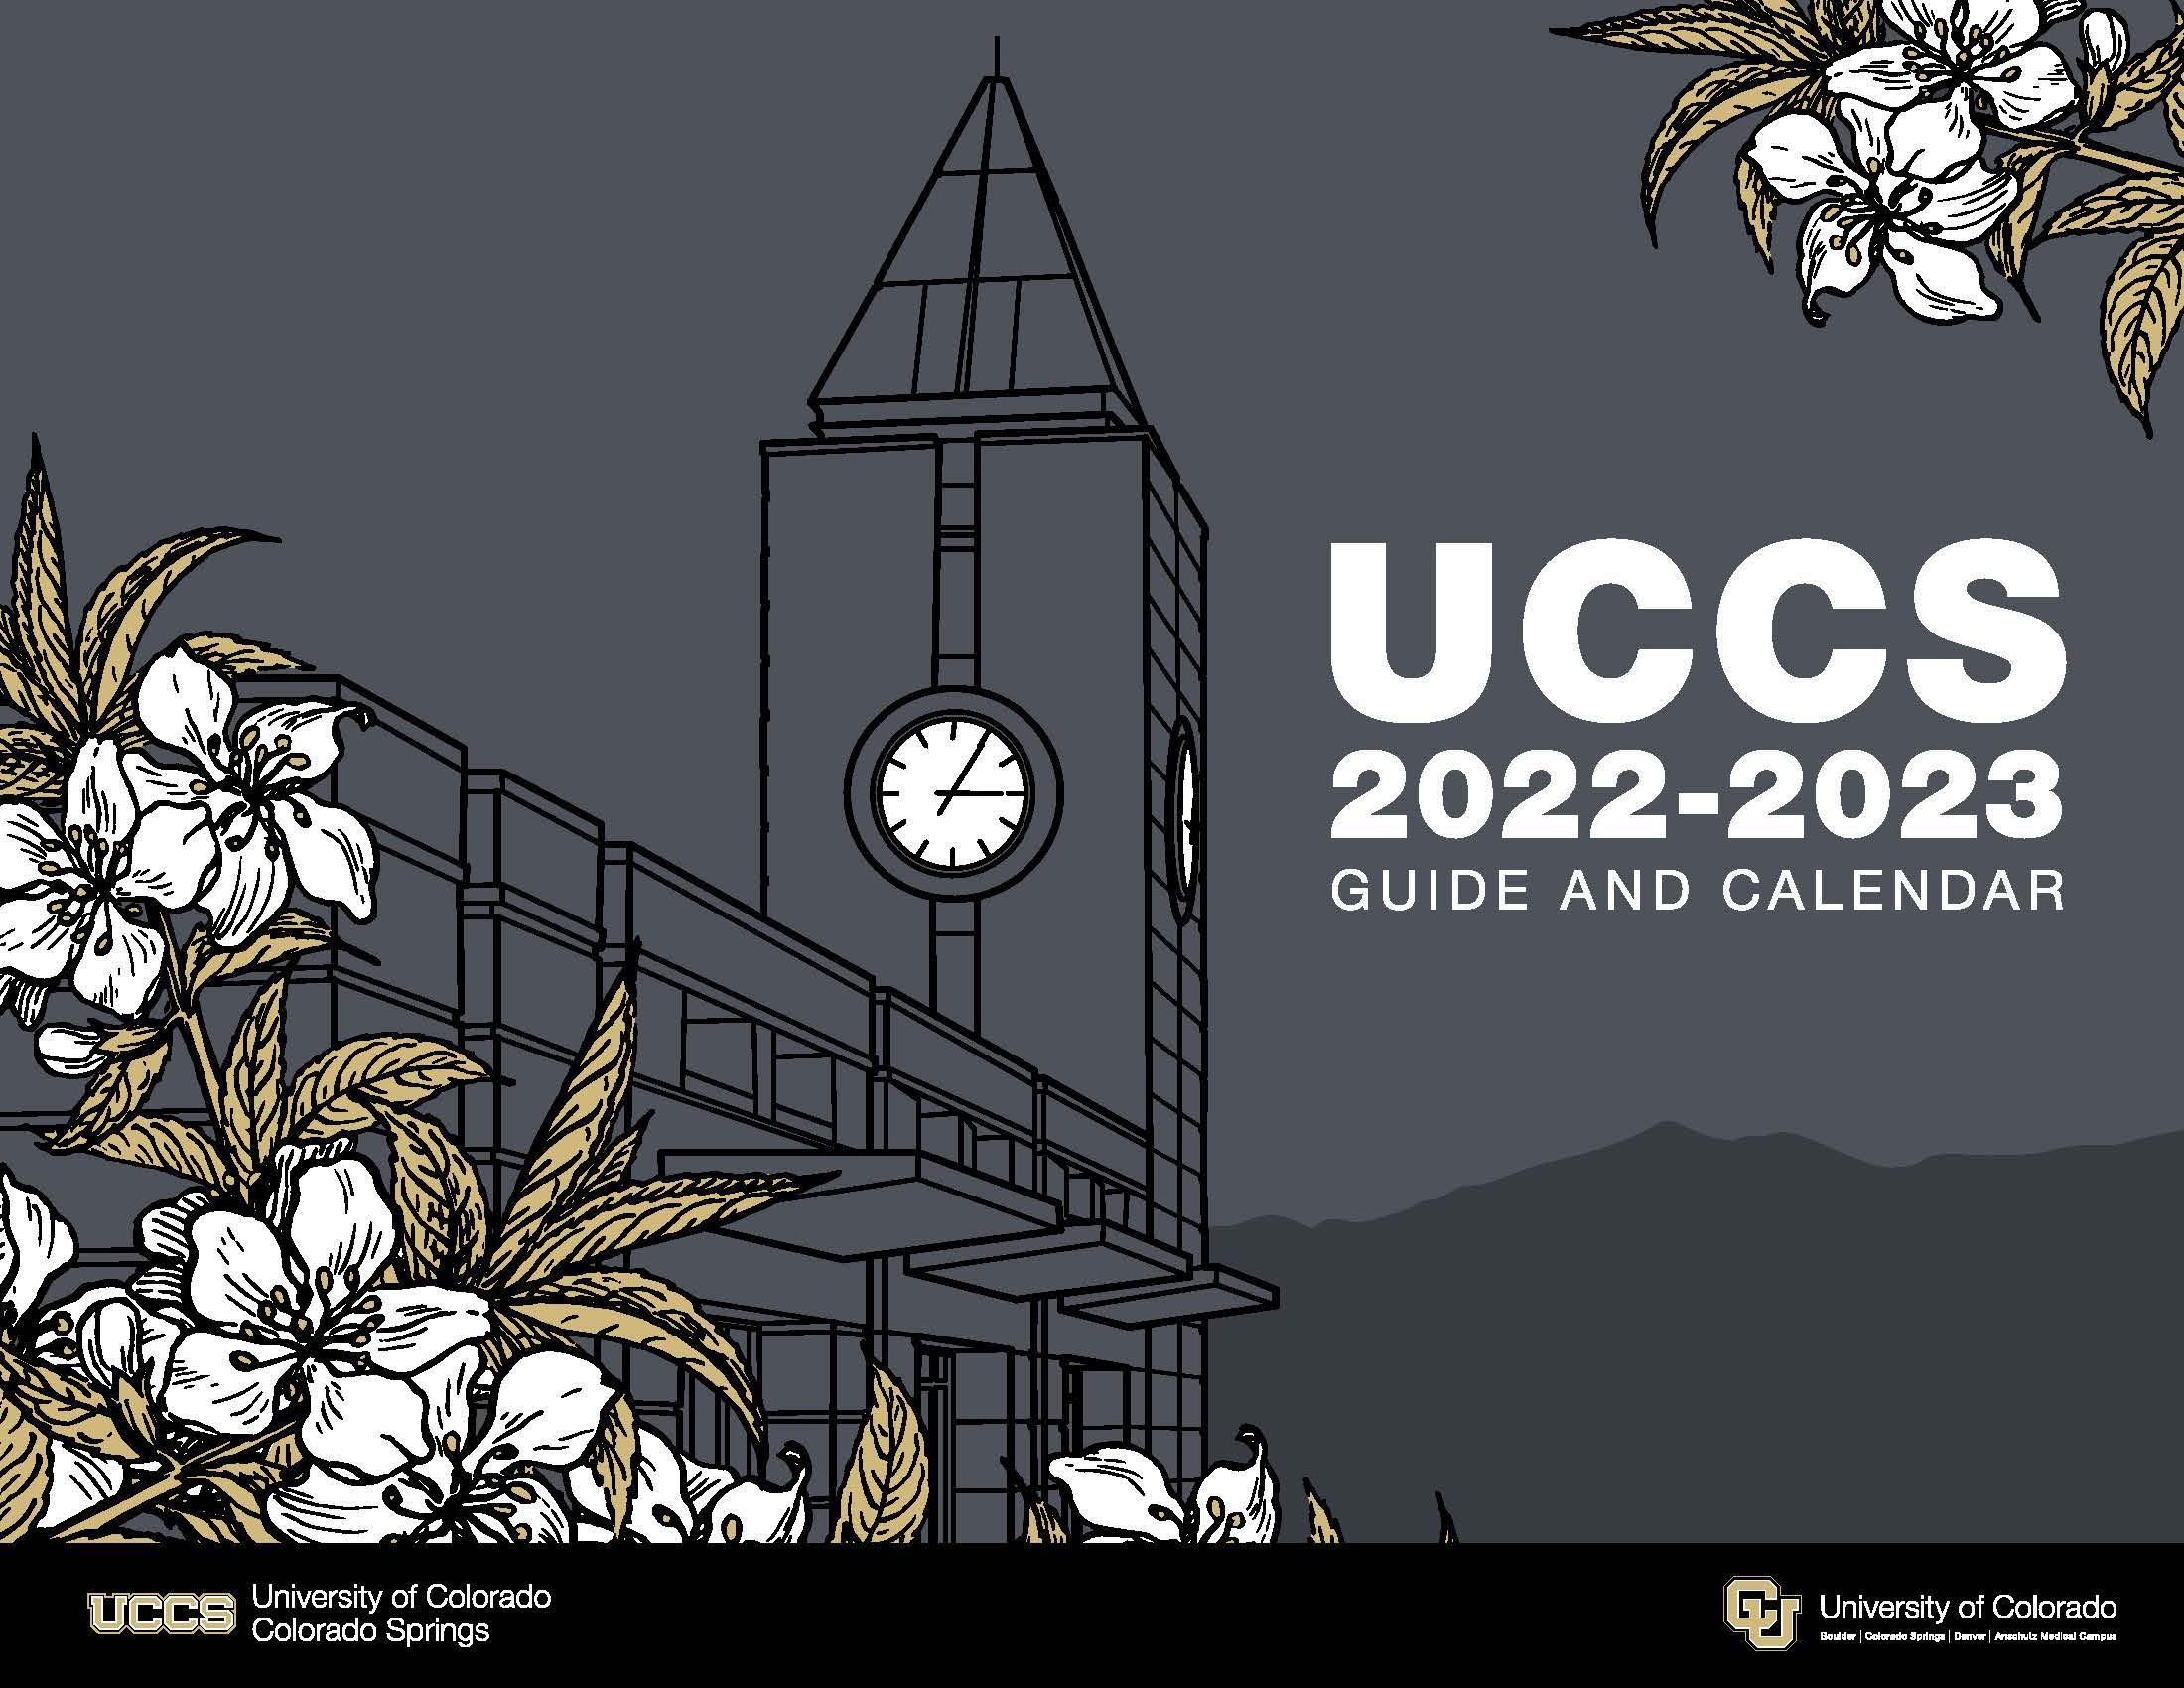 UCCS 2022-2023 Guide and Calendar - click here to access pdf